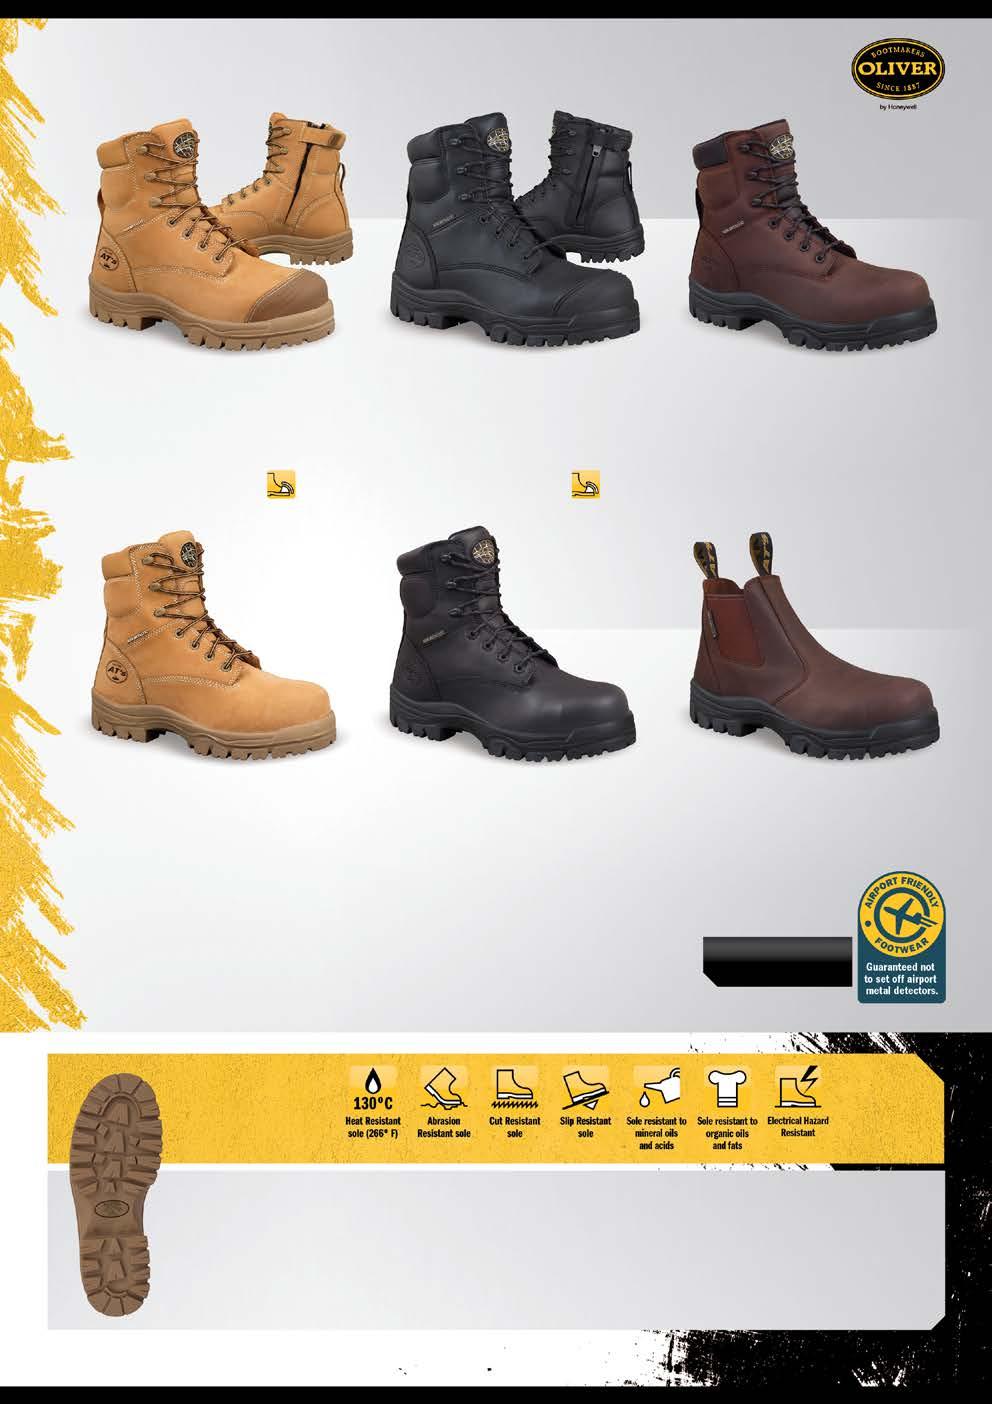 AT45 SERIES 45-632Z 150MM WHEAT ZIP SIDED BOOT Water resistant nubuck leather Full lining and comfort footbed infused with Fully non-metallic EXTRA FEATURES: Convenient side zip TOE Sizes: 5-14, 6½ -